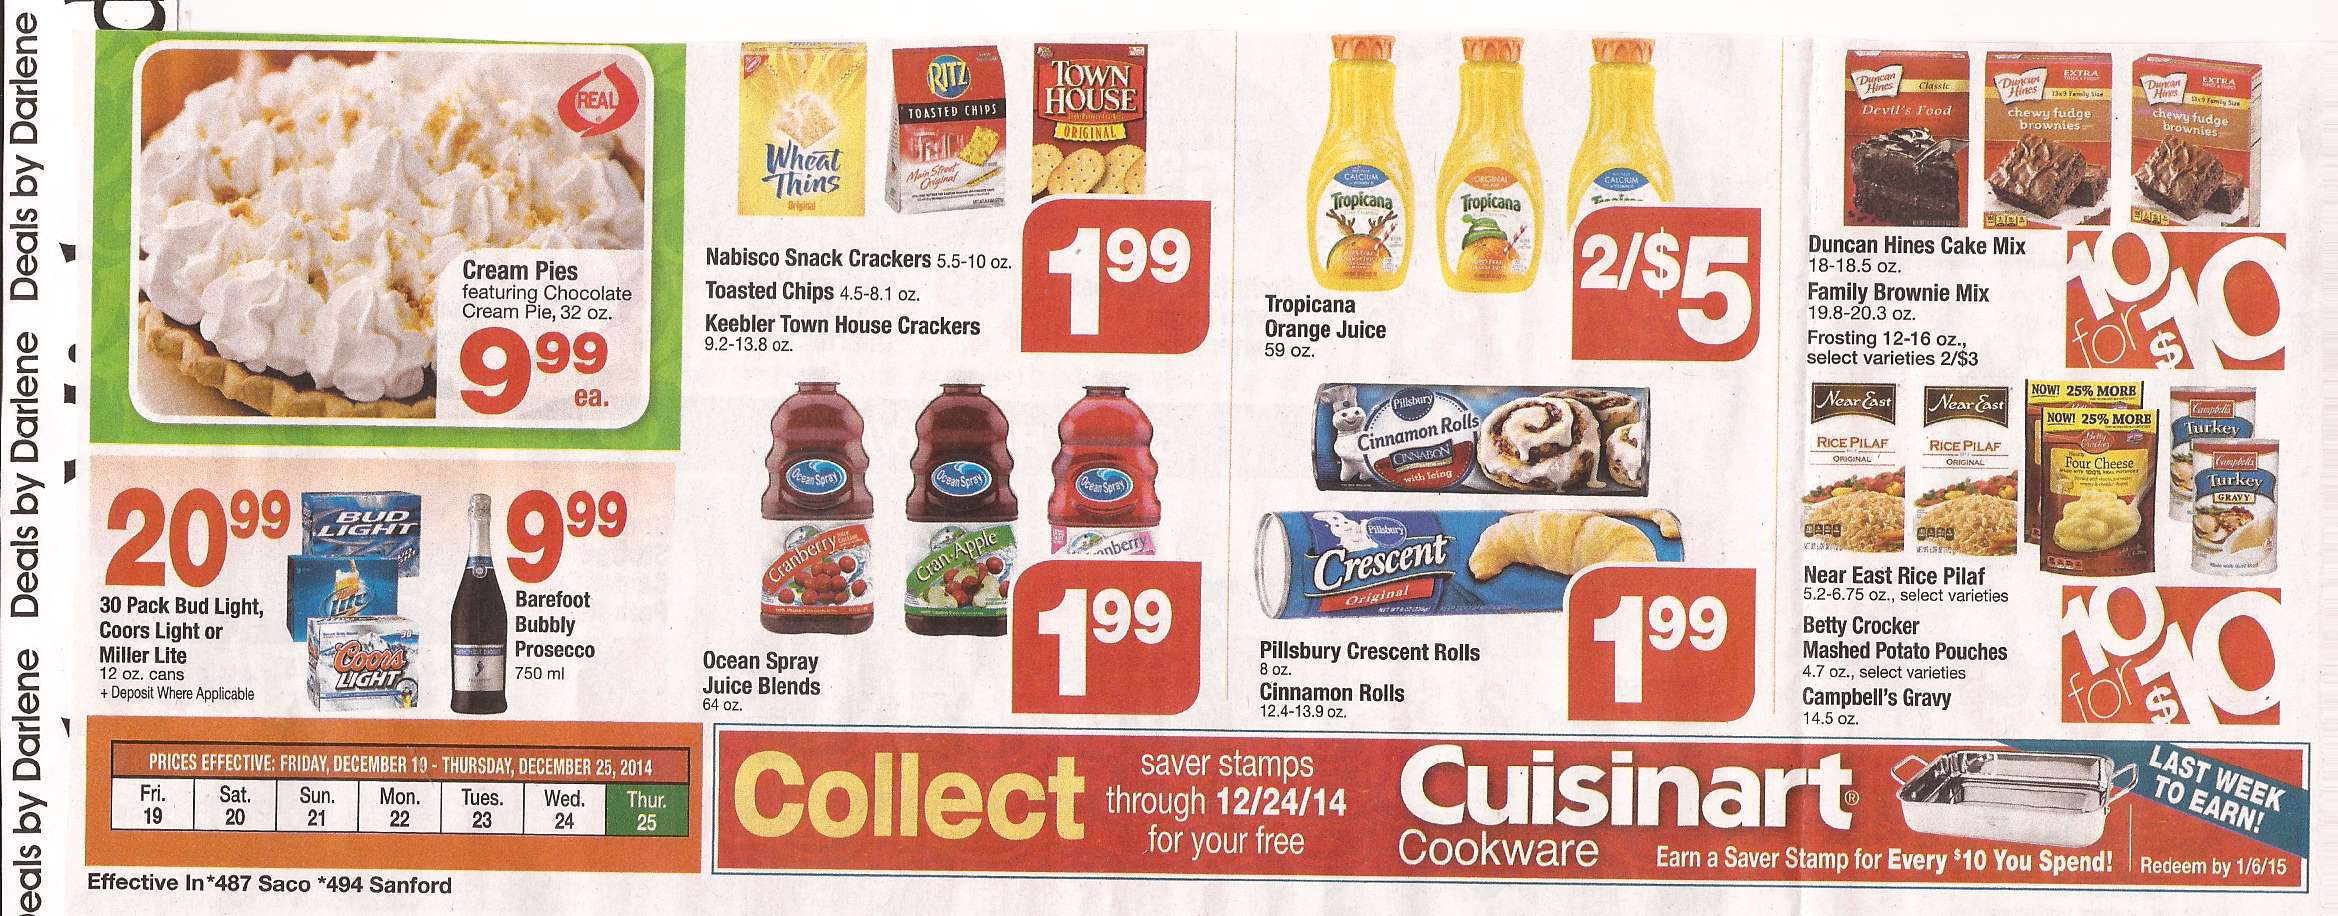 shaws-flyer-ad-scan-preview-december-19-december-25-page-1c